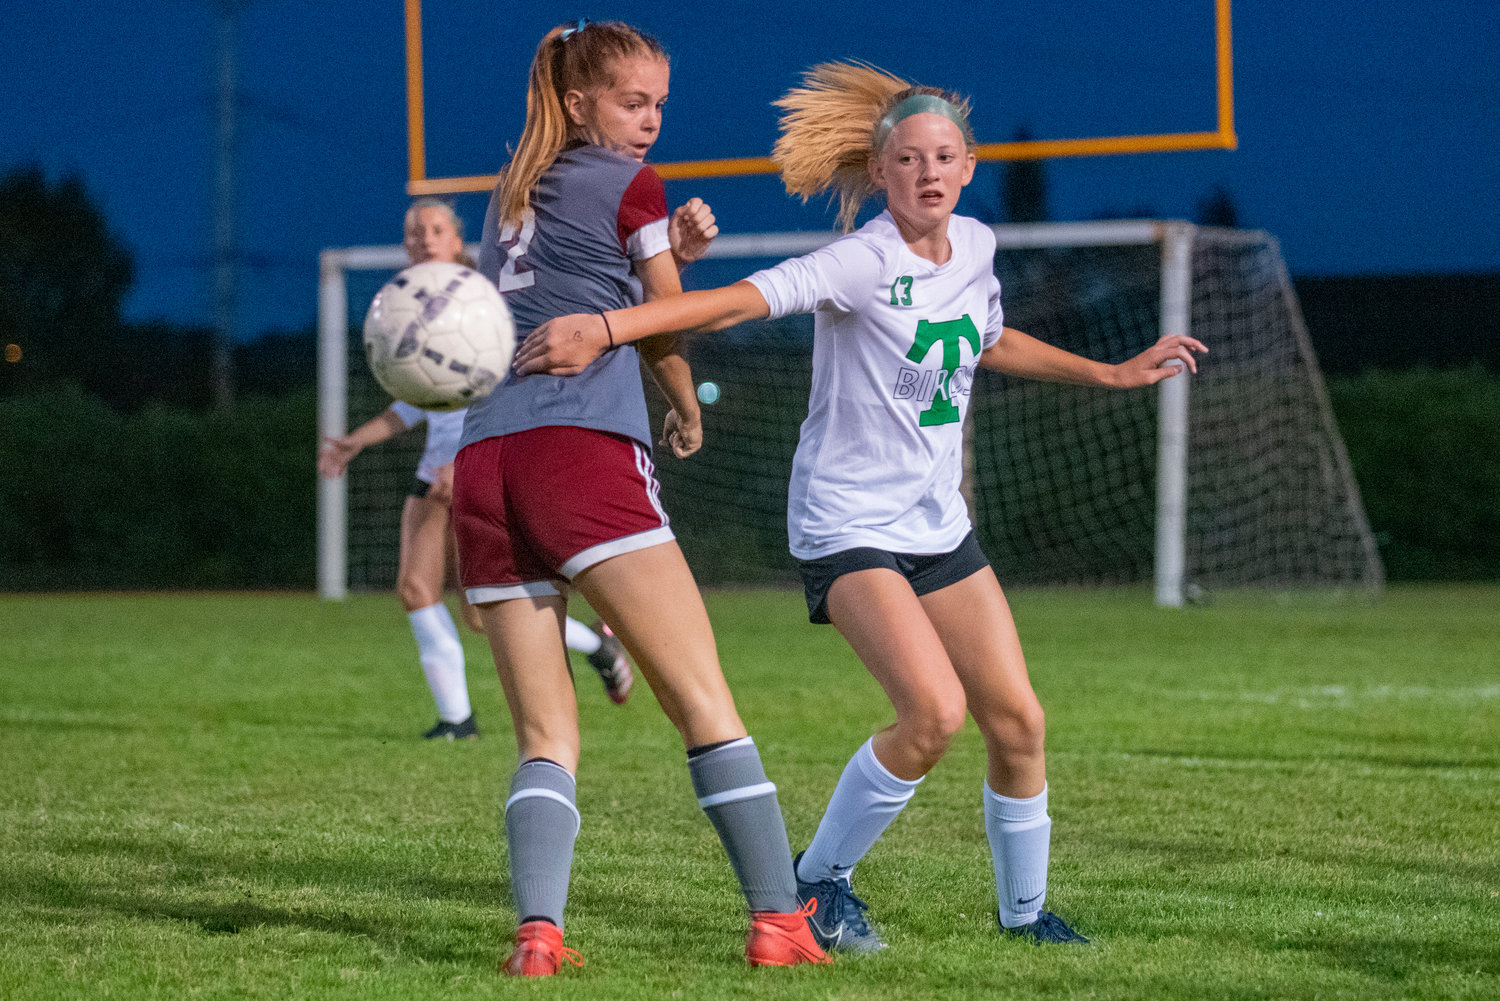 Tumwater's Lucy Bergford (13) knocks the ball past W.F. West's Maddy Casper (2) on Tuesday in Chehalis.